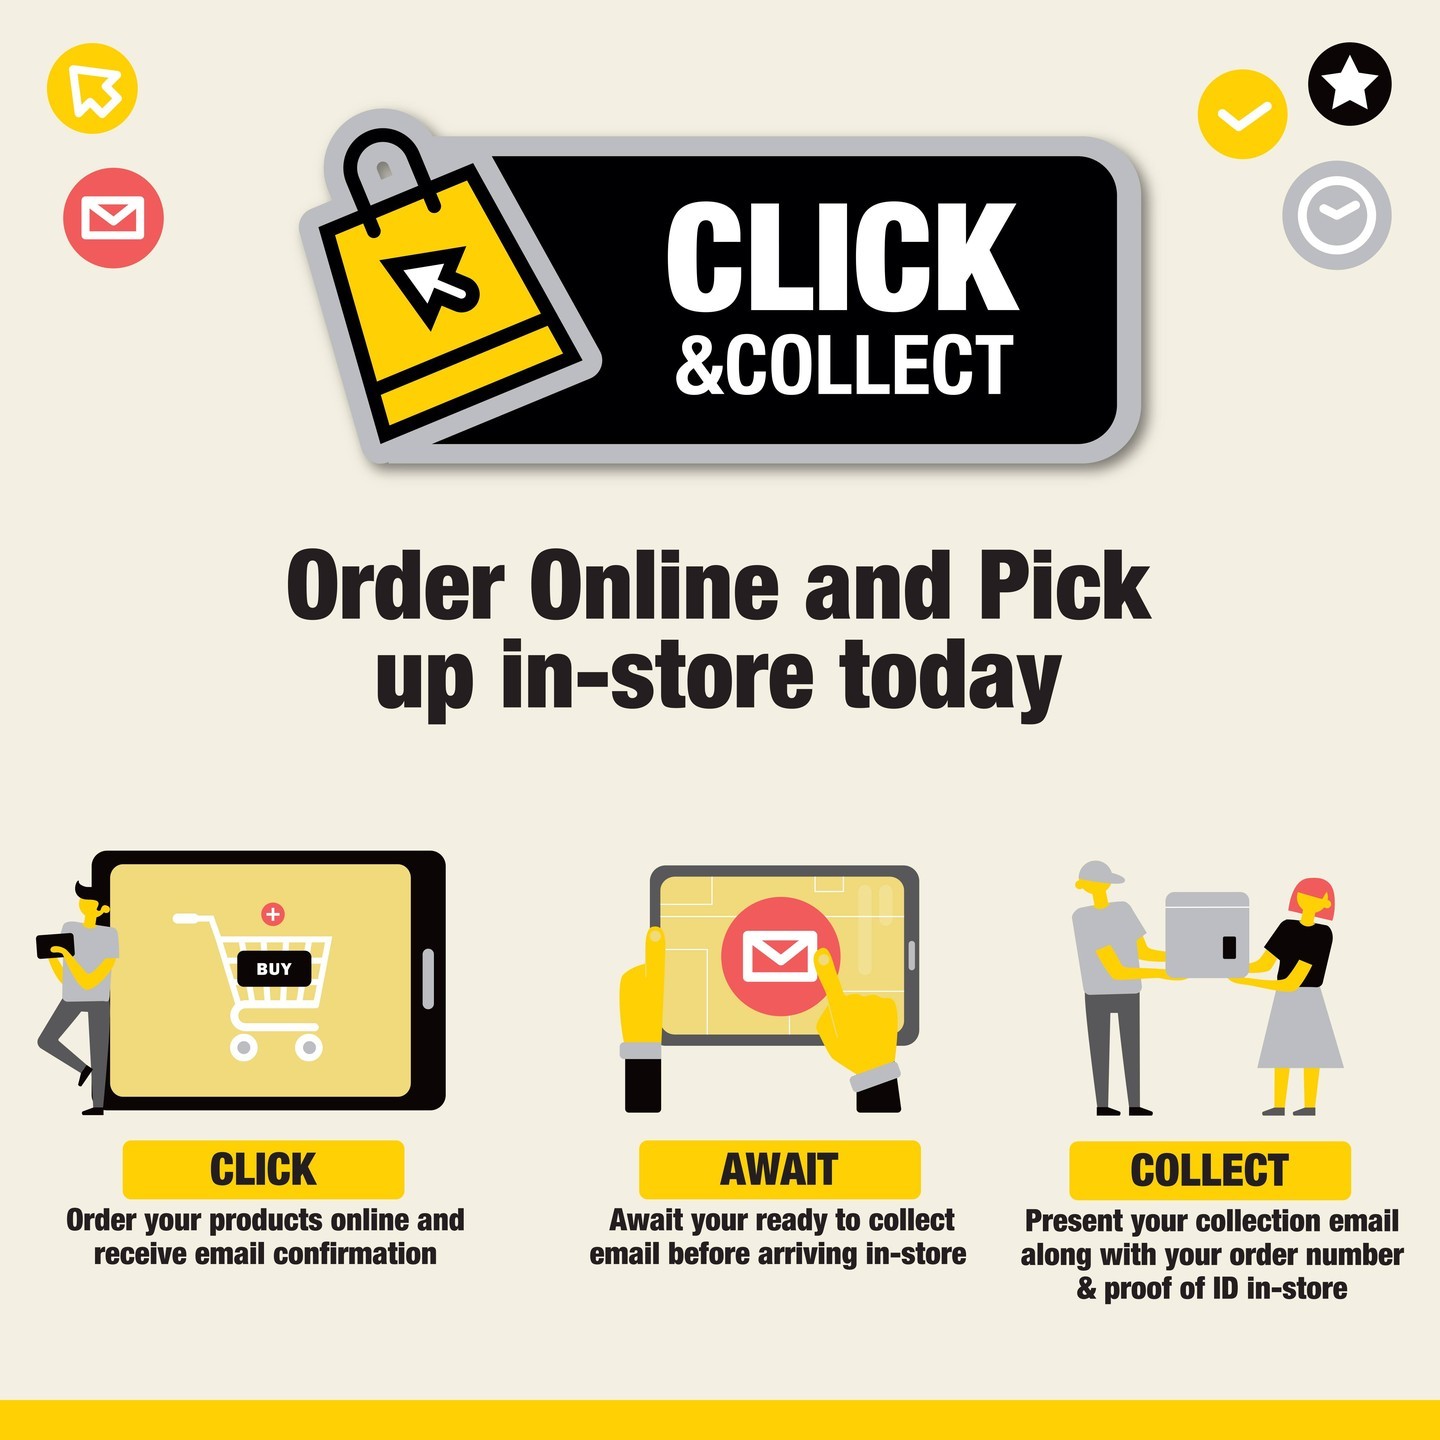 Why wait for delivery? Get your hands on your order sooner with our Click & Collect feature! Skip shipping and pick up y